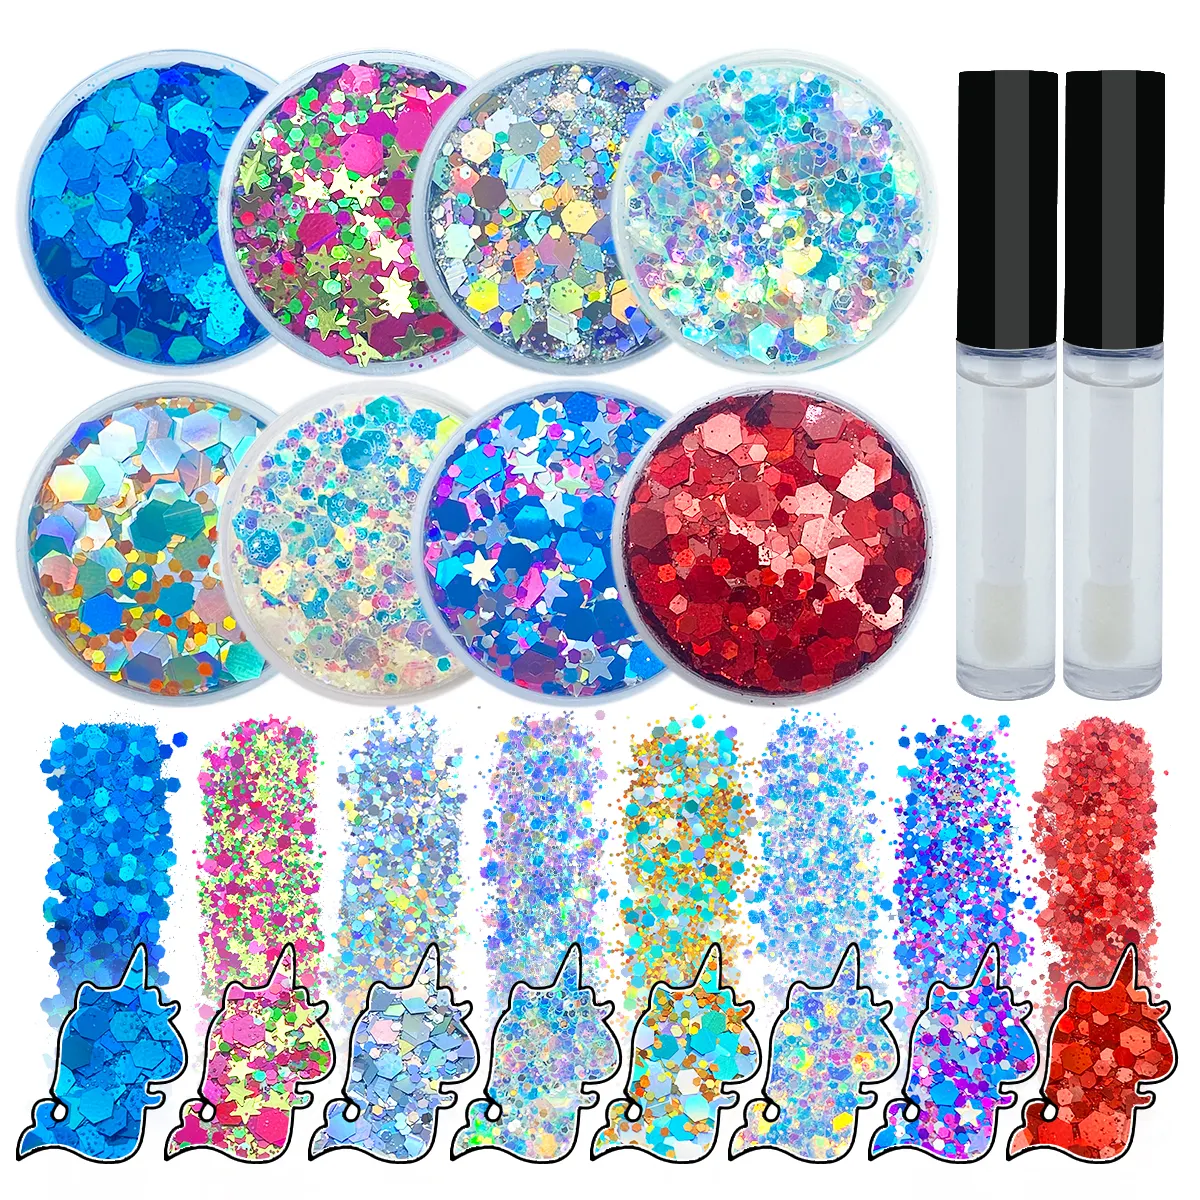 Wholesale High Quality Polyester Gel Glitter Palette Dot Mixes Glitter with Free Makeup Samples